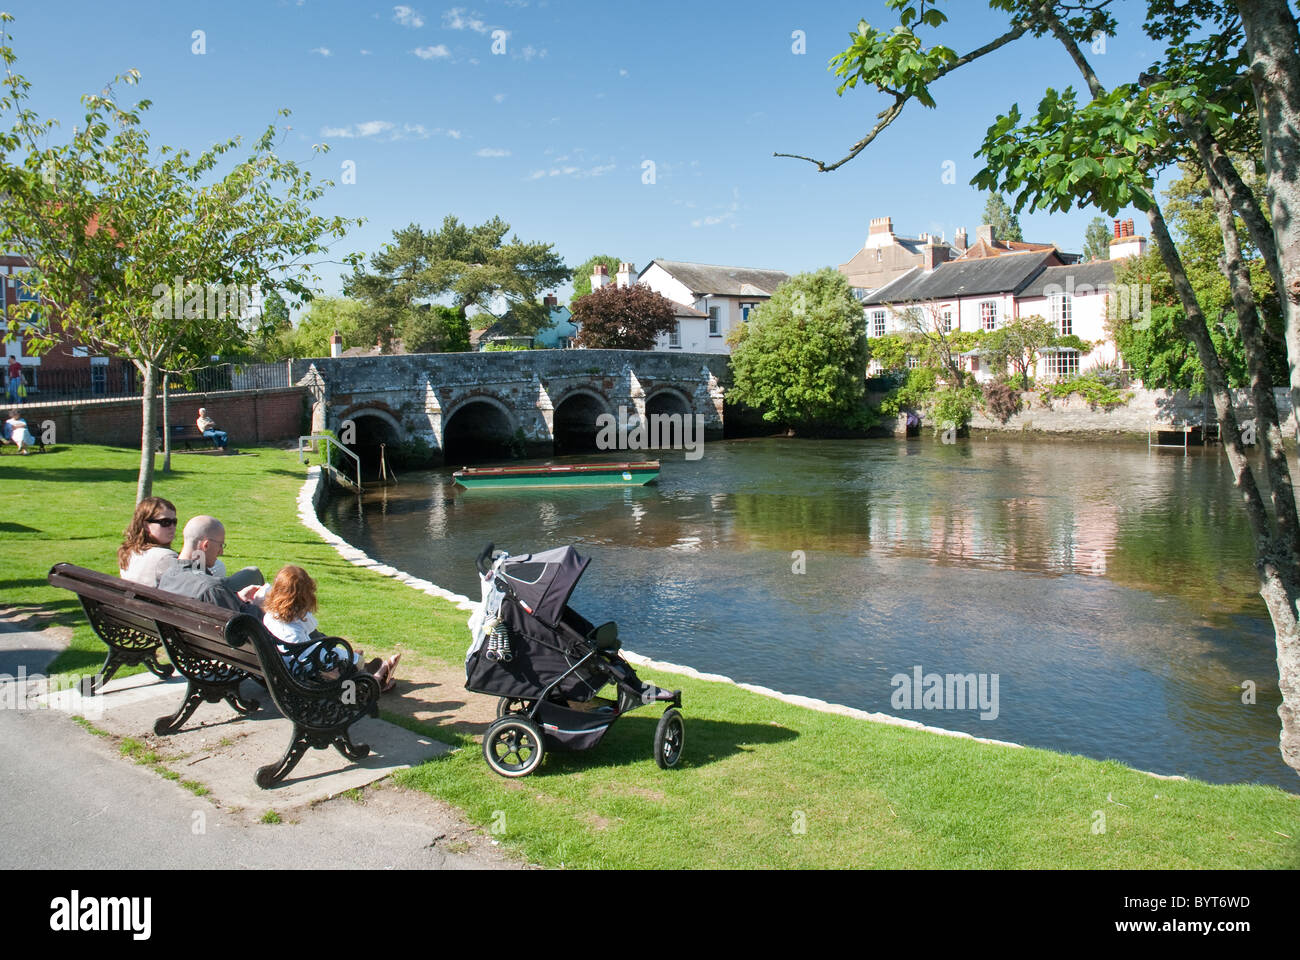 A group of people sit on a park bench near the Avon River in Christchurch, Dorset. Stock Photo